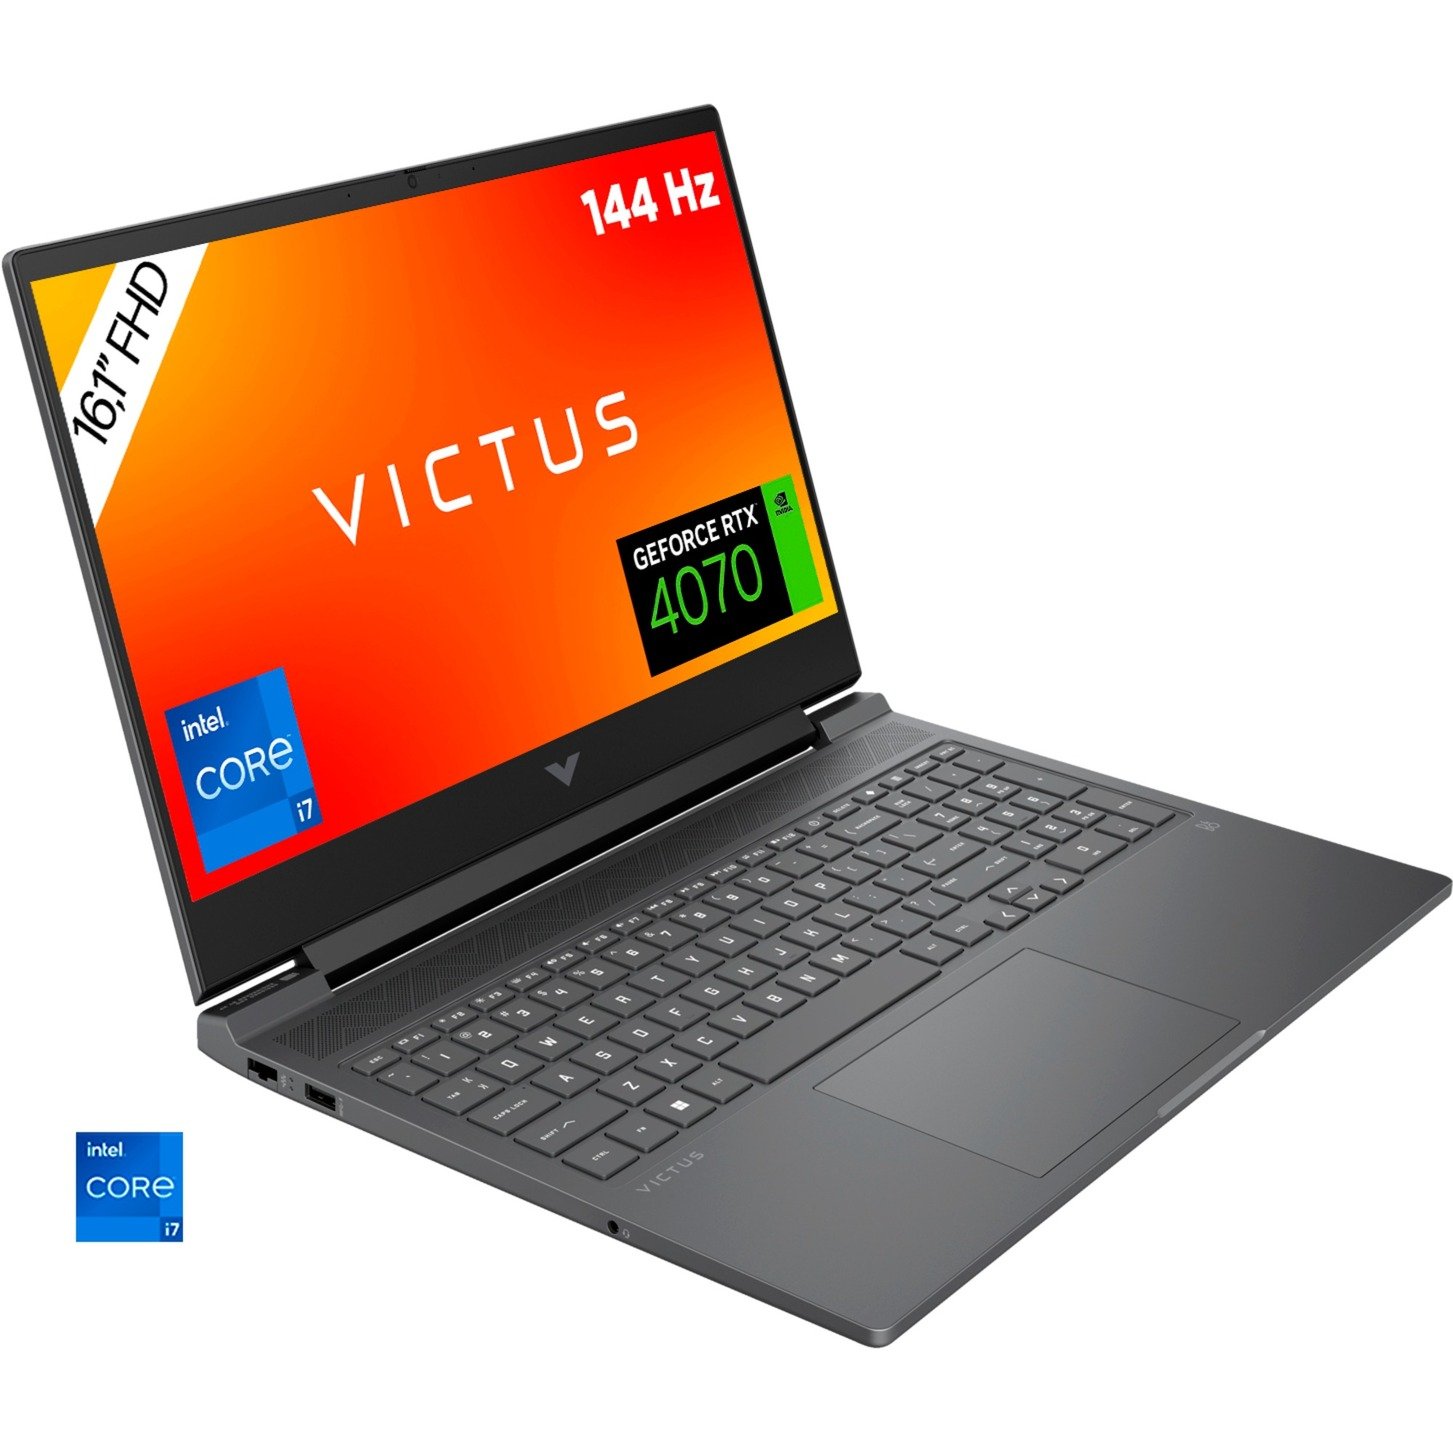 16-r0177ng, Gaming-Notebook von Victus by HP